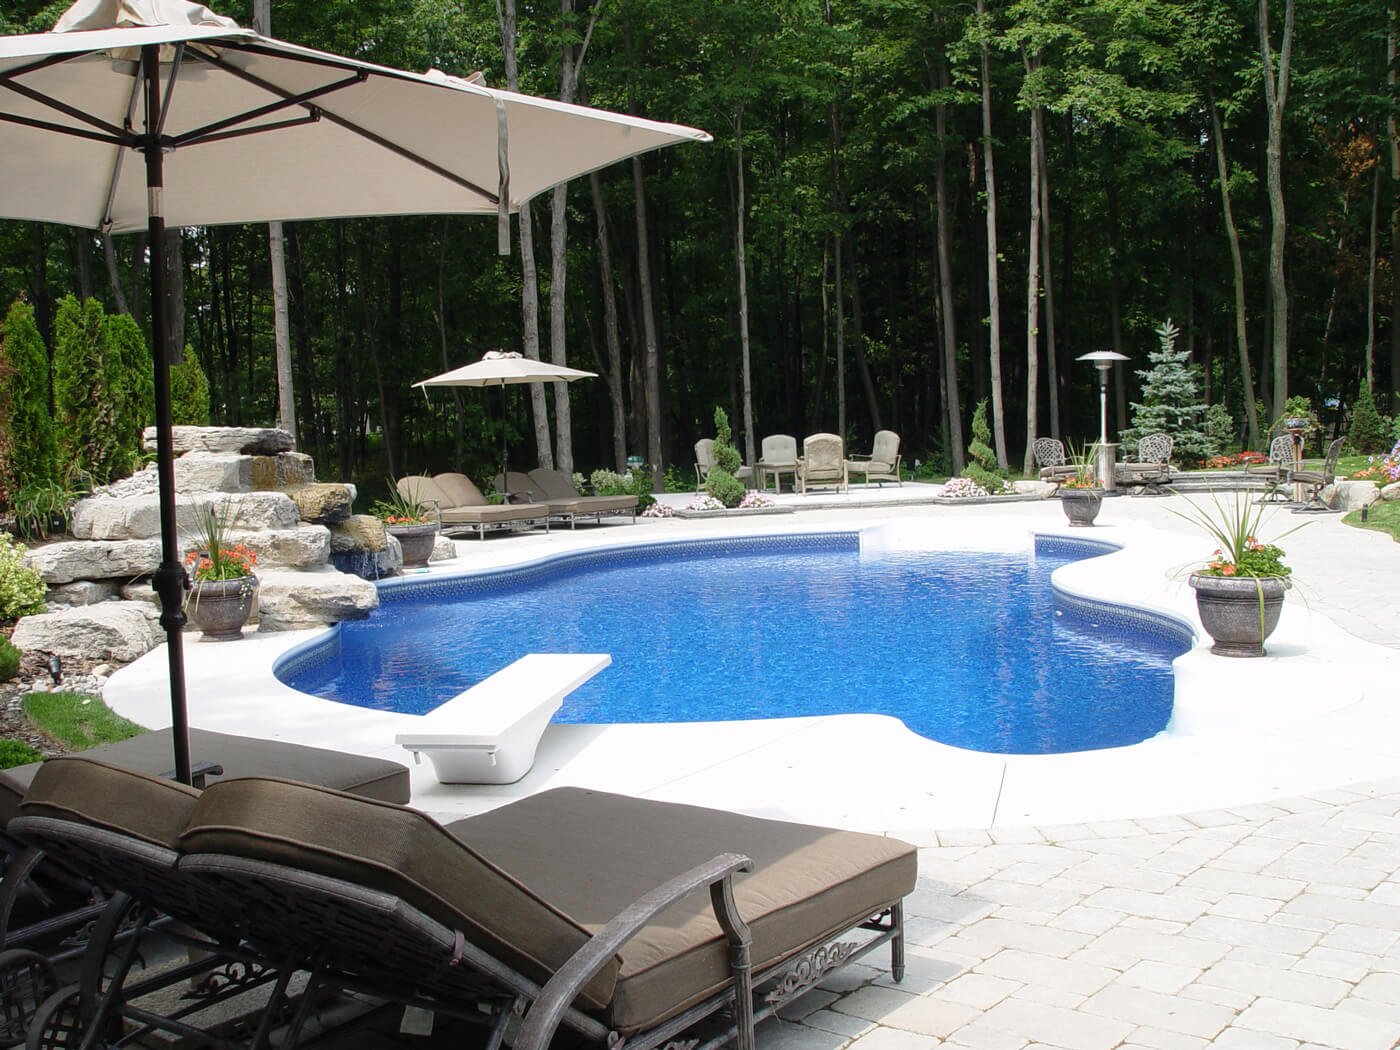 Pool Landscaping Tips: 5 Ideas to Increase Appeal